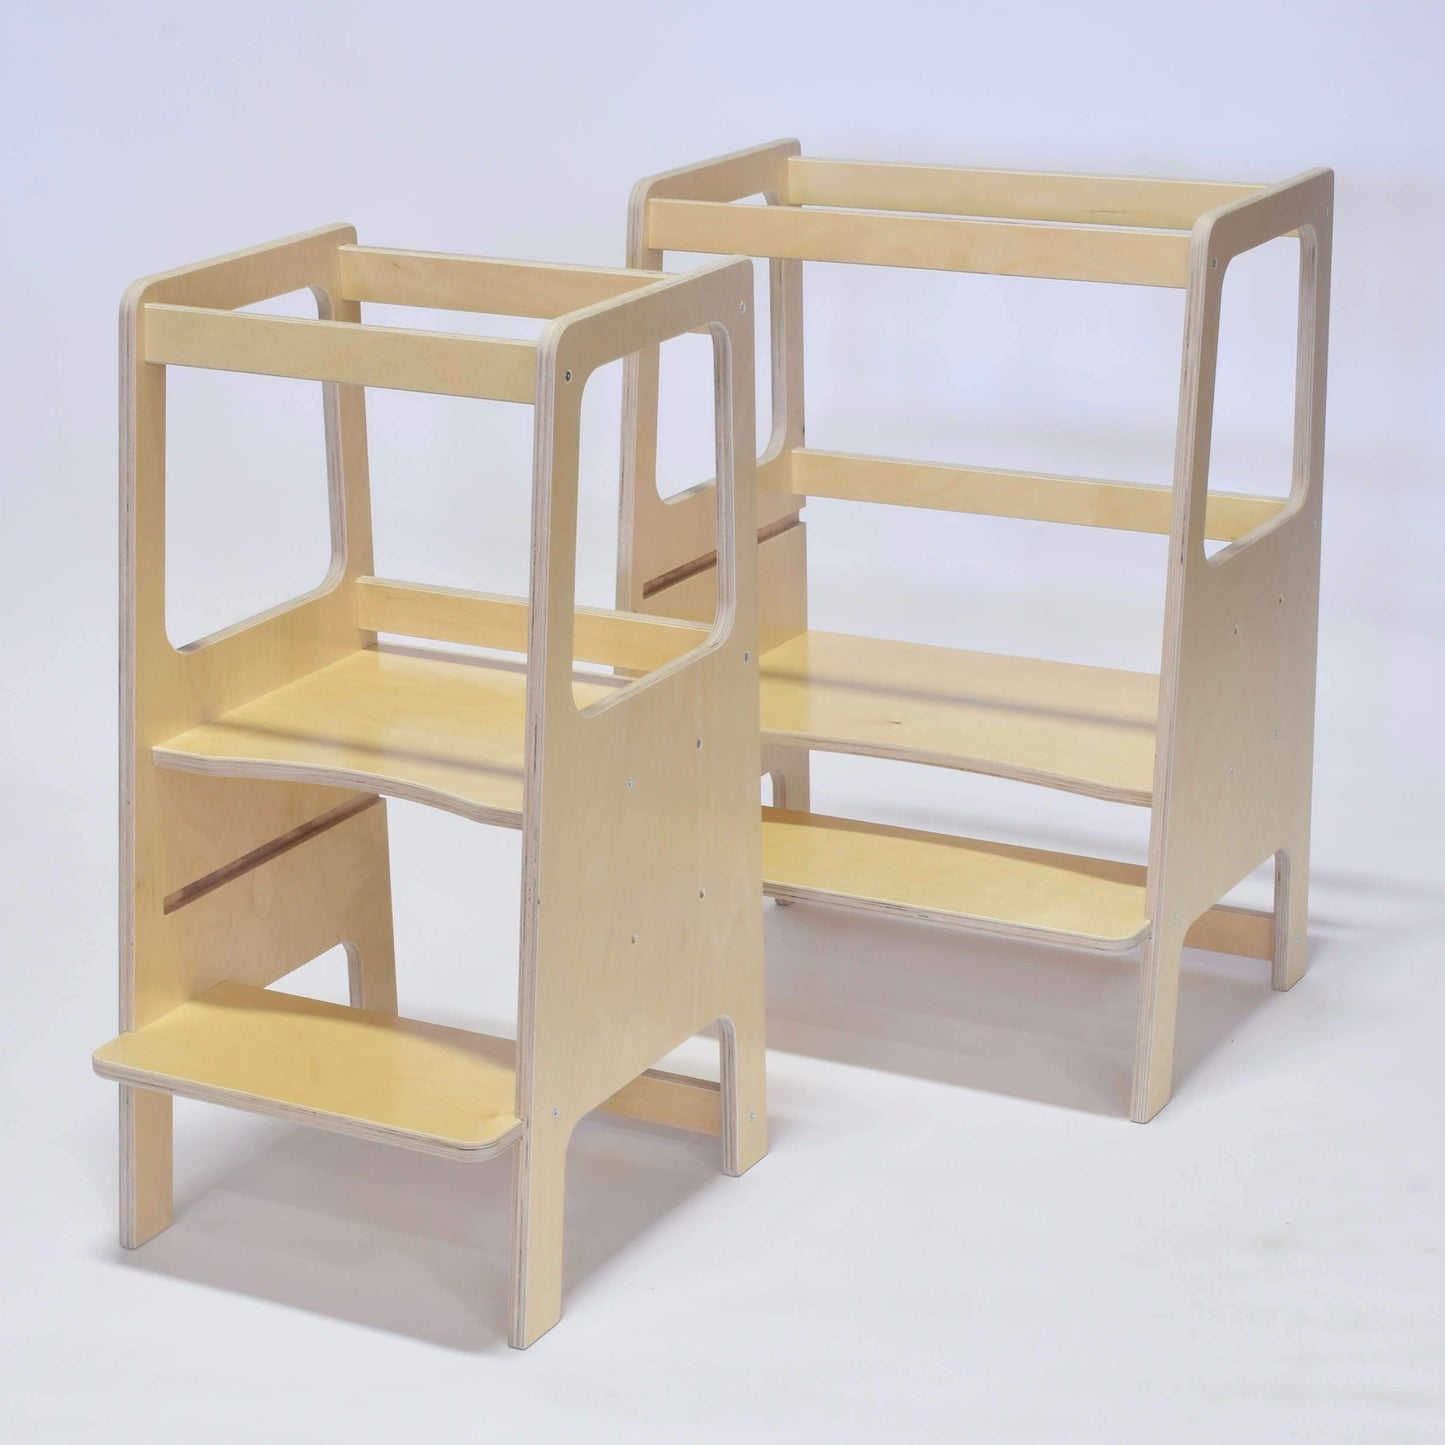 Toddler tower for children for Montessori learning in the kitchen – RAD  Children's Furniture